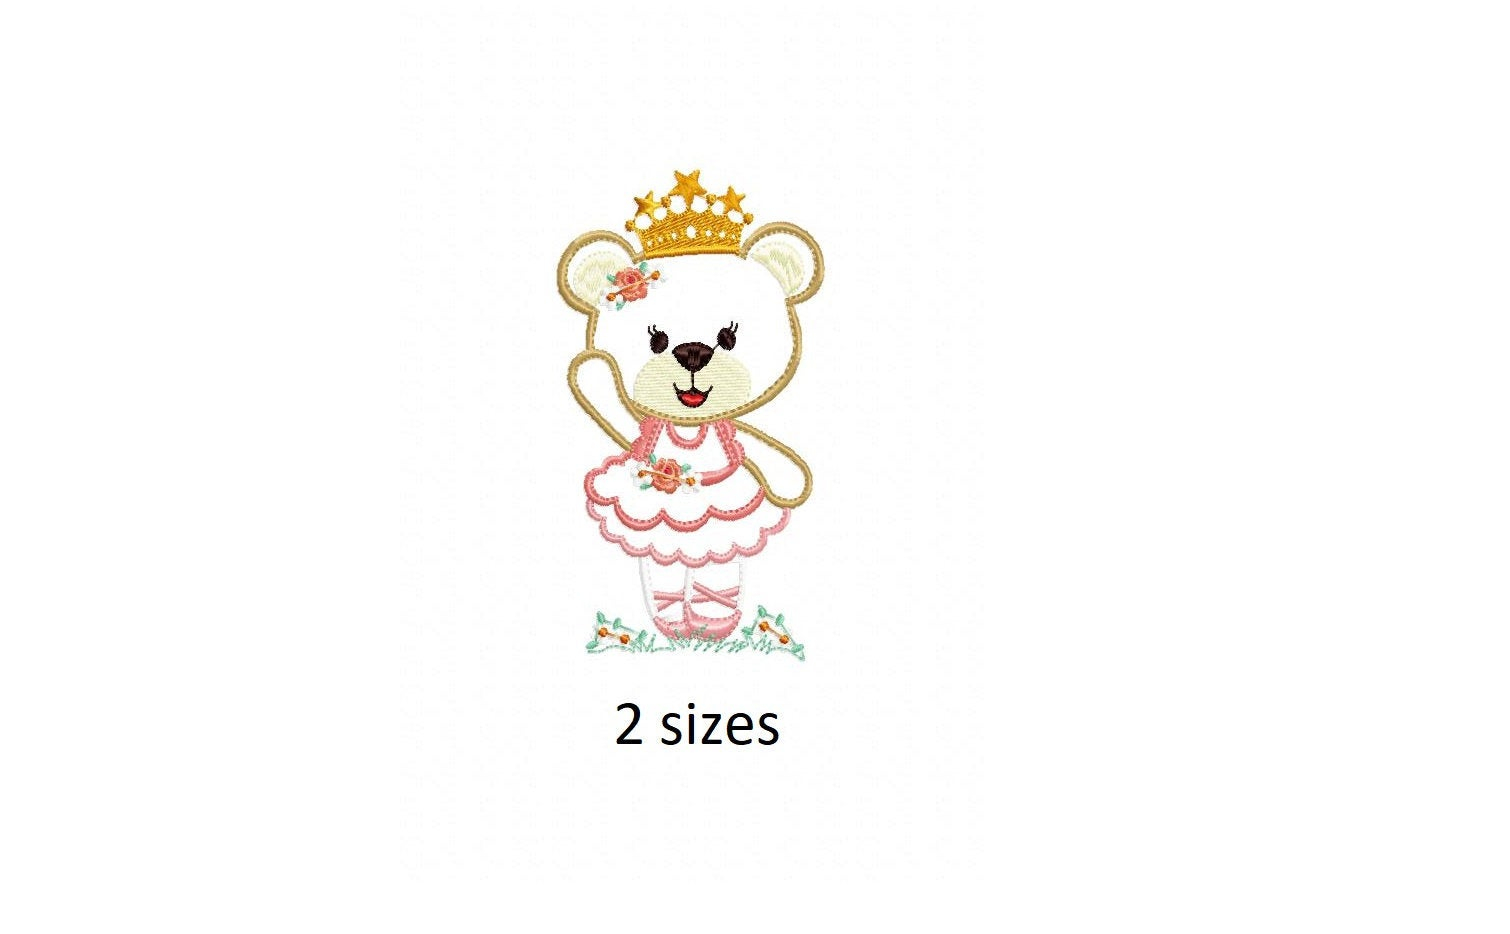 Baby Embroidery Patterns Bear Ballerina Embroidery Designs Girls Embroidery Design Machine Embroidery Pattern Ba Embroidery File Ba Embroidery Applique Design